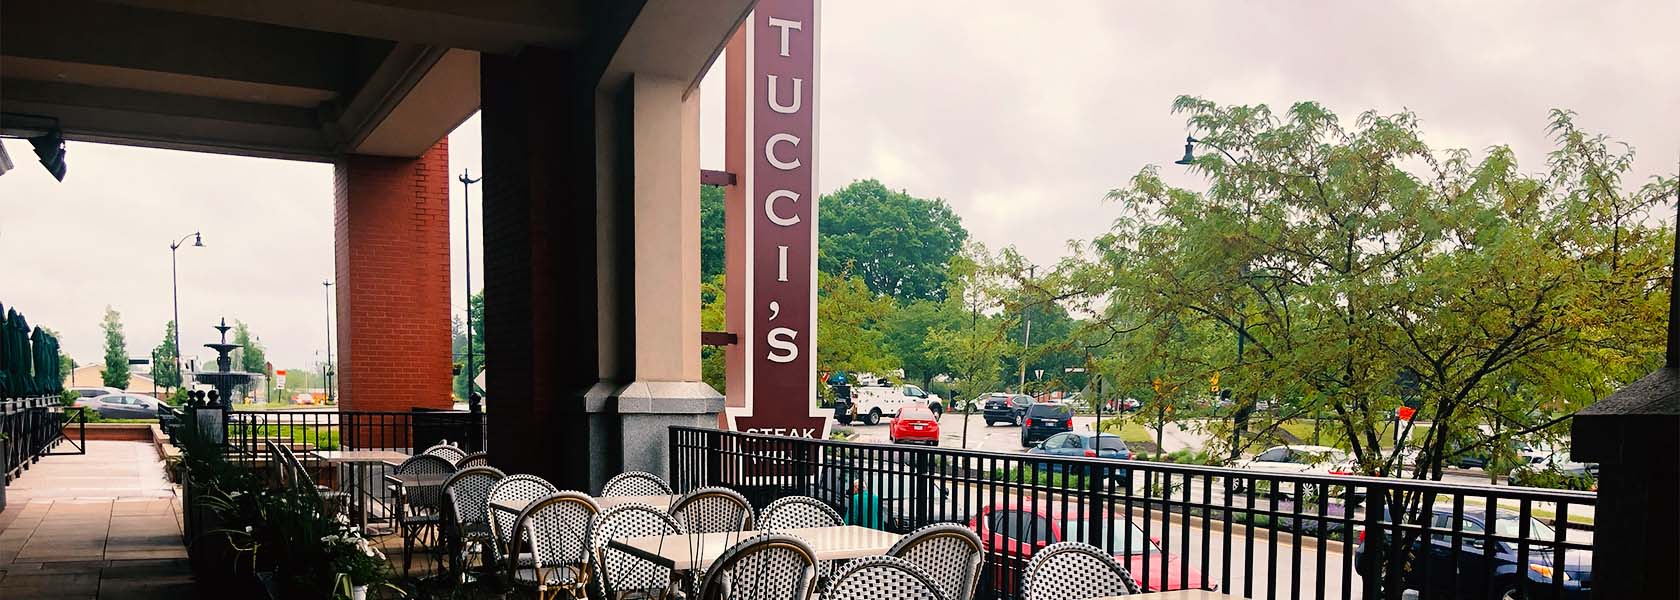 Exterior view of Tucci's patio and signage at Carmel City Center, Indiana.